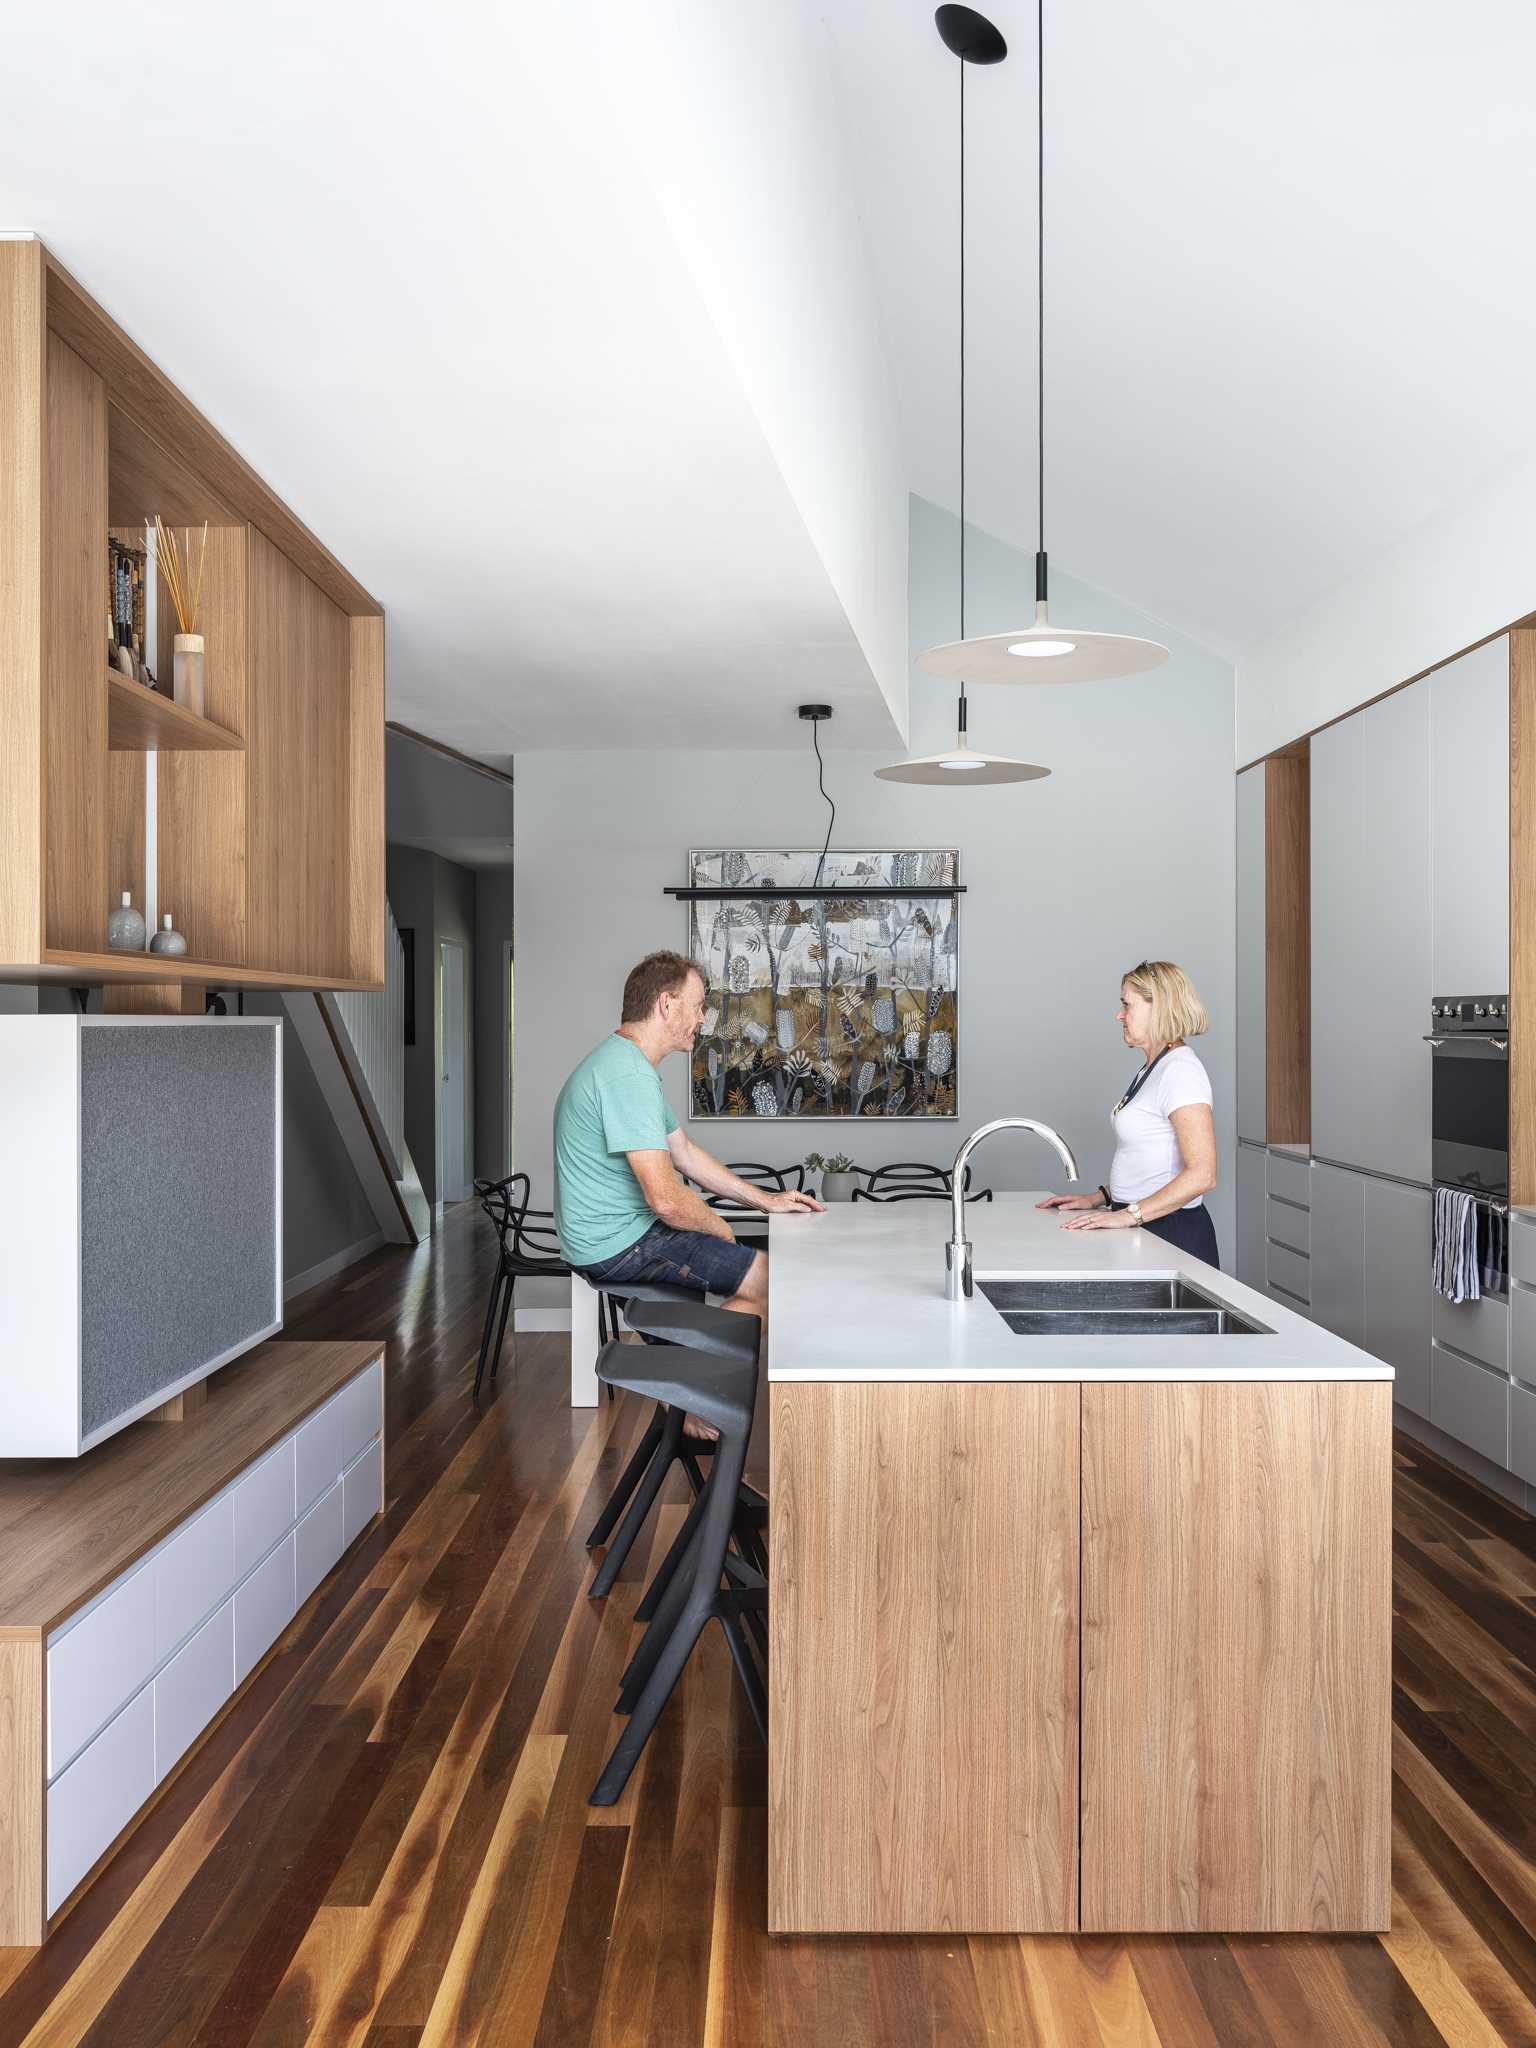 In this modern kitchen, wood and white cabinetry complement the wood floor and soften the concrete elements found outside.